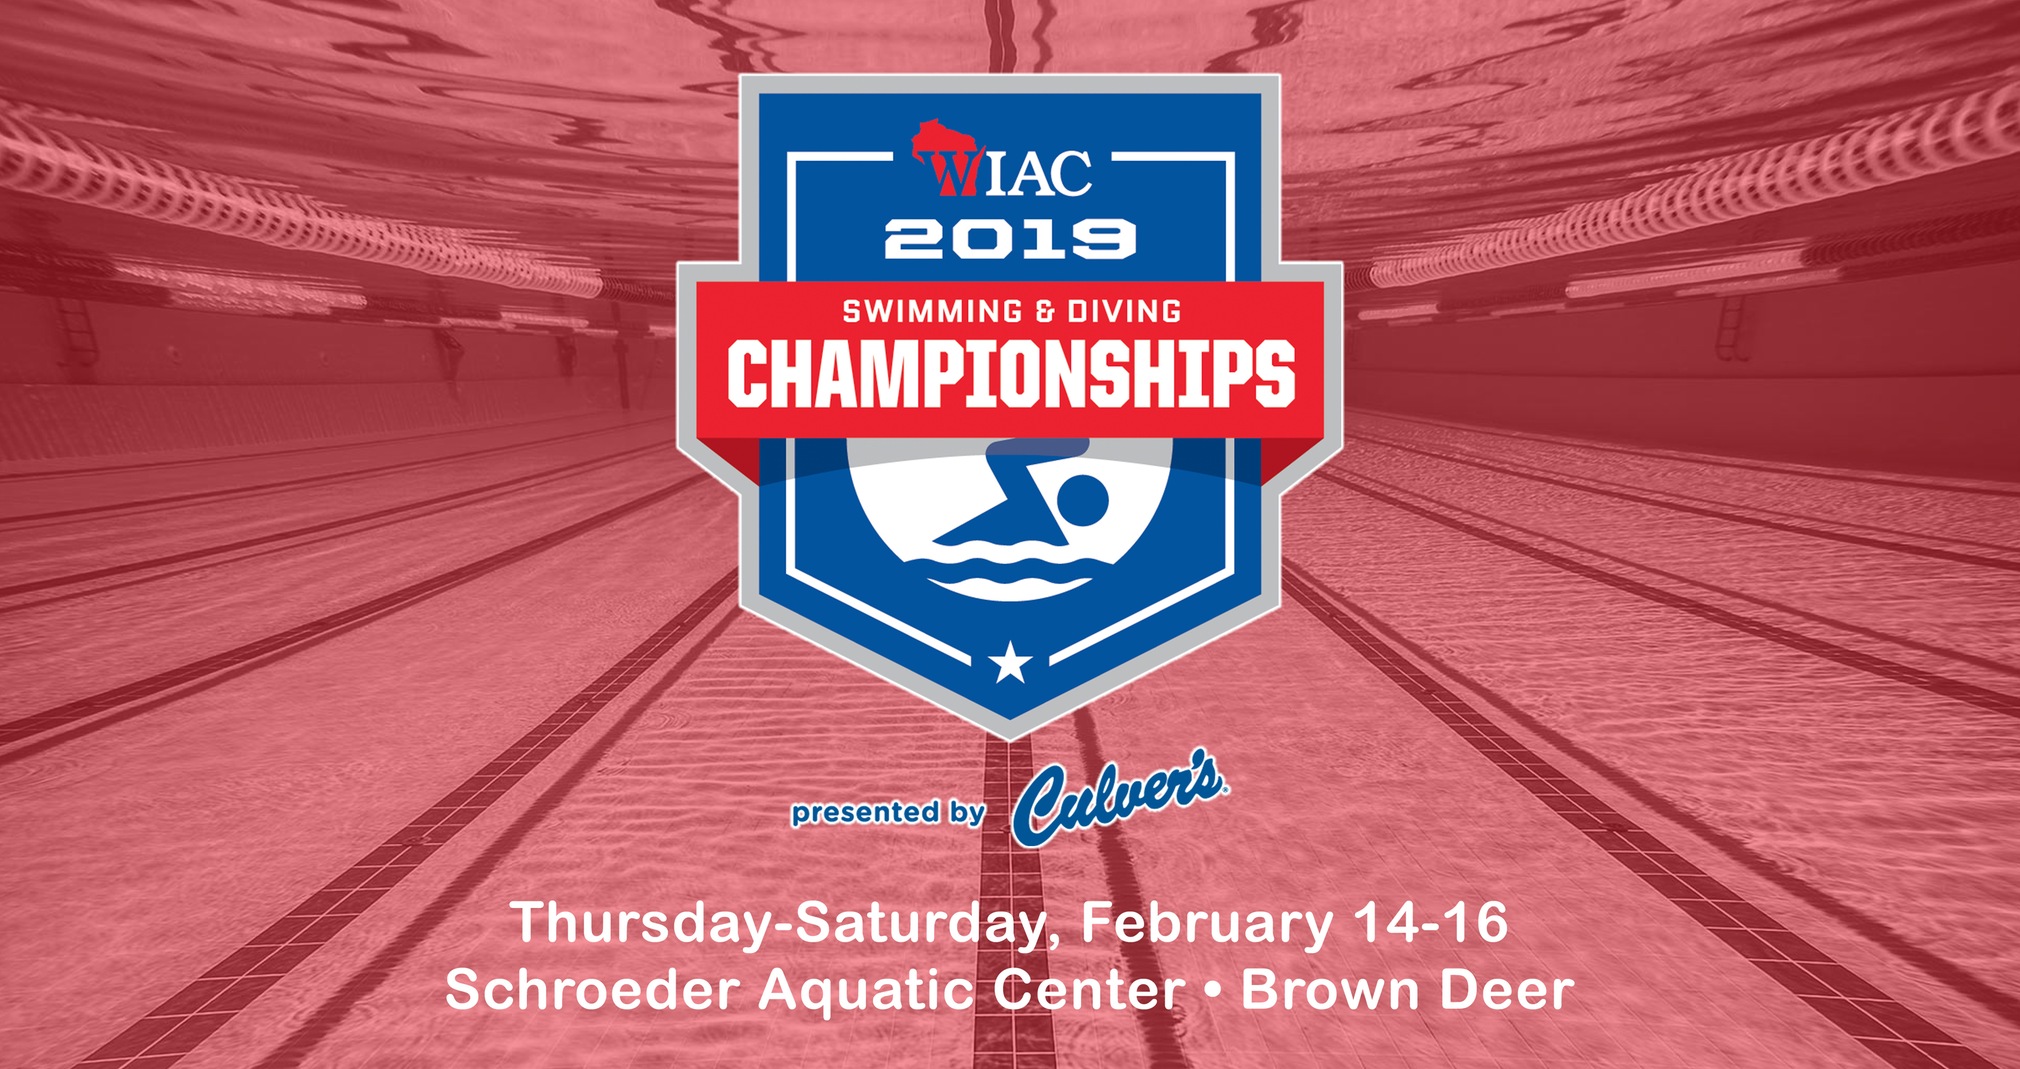 Titans To Perform At WIAC Swimming & Diving Championship